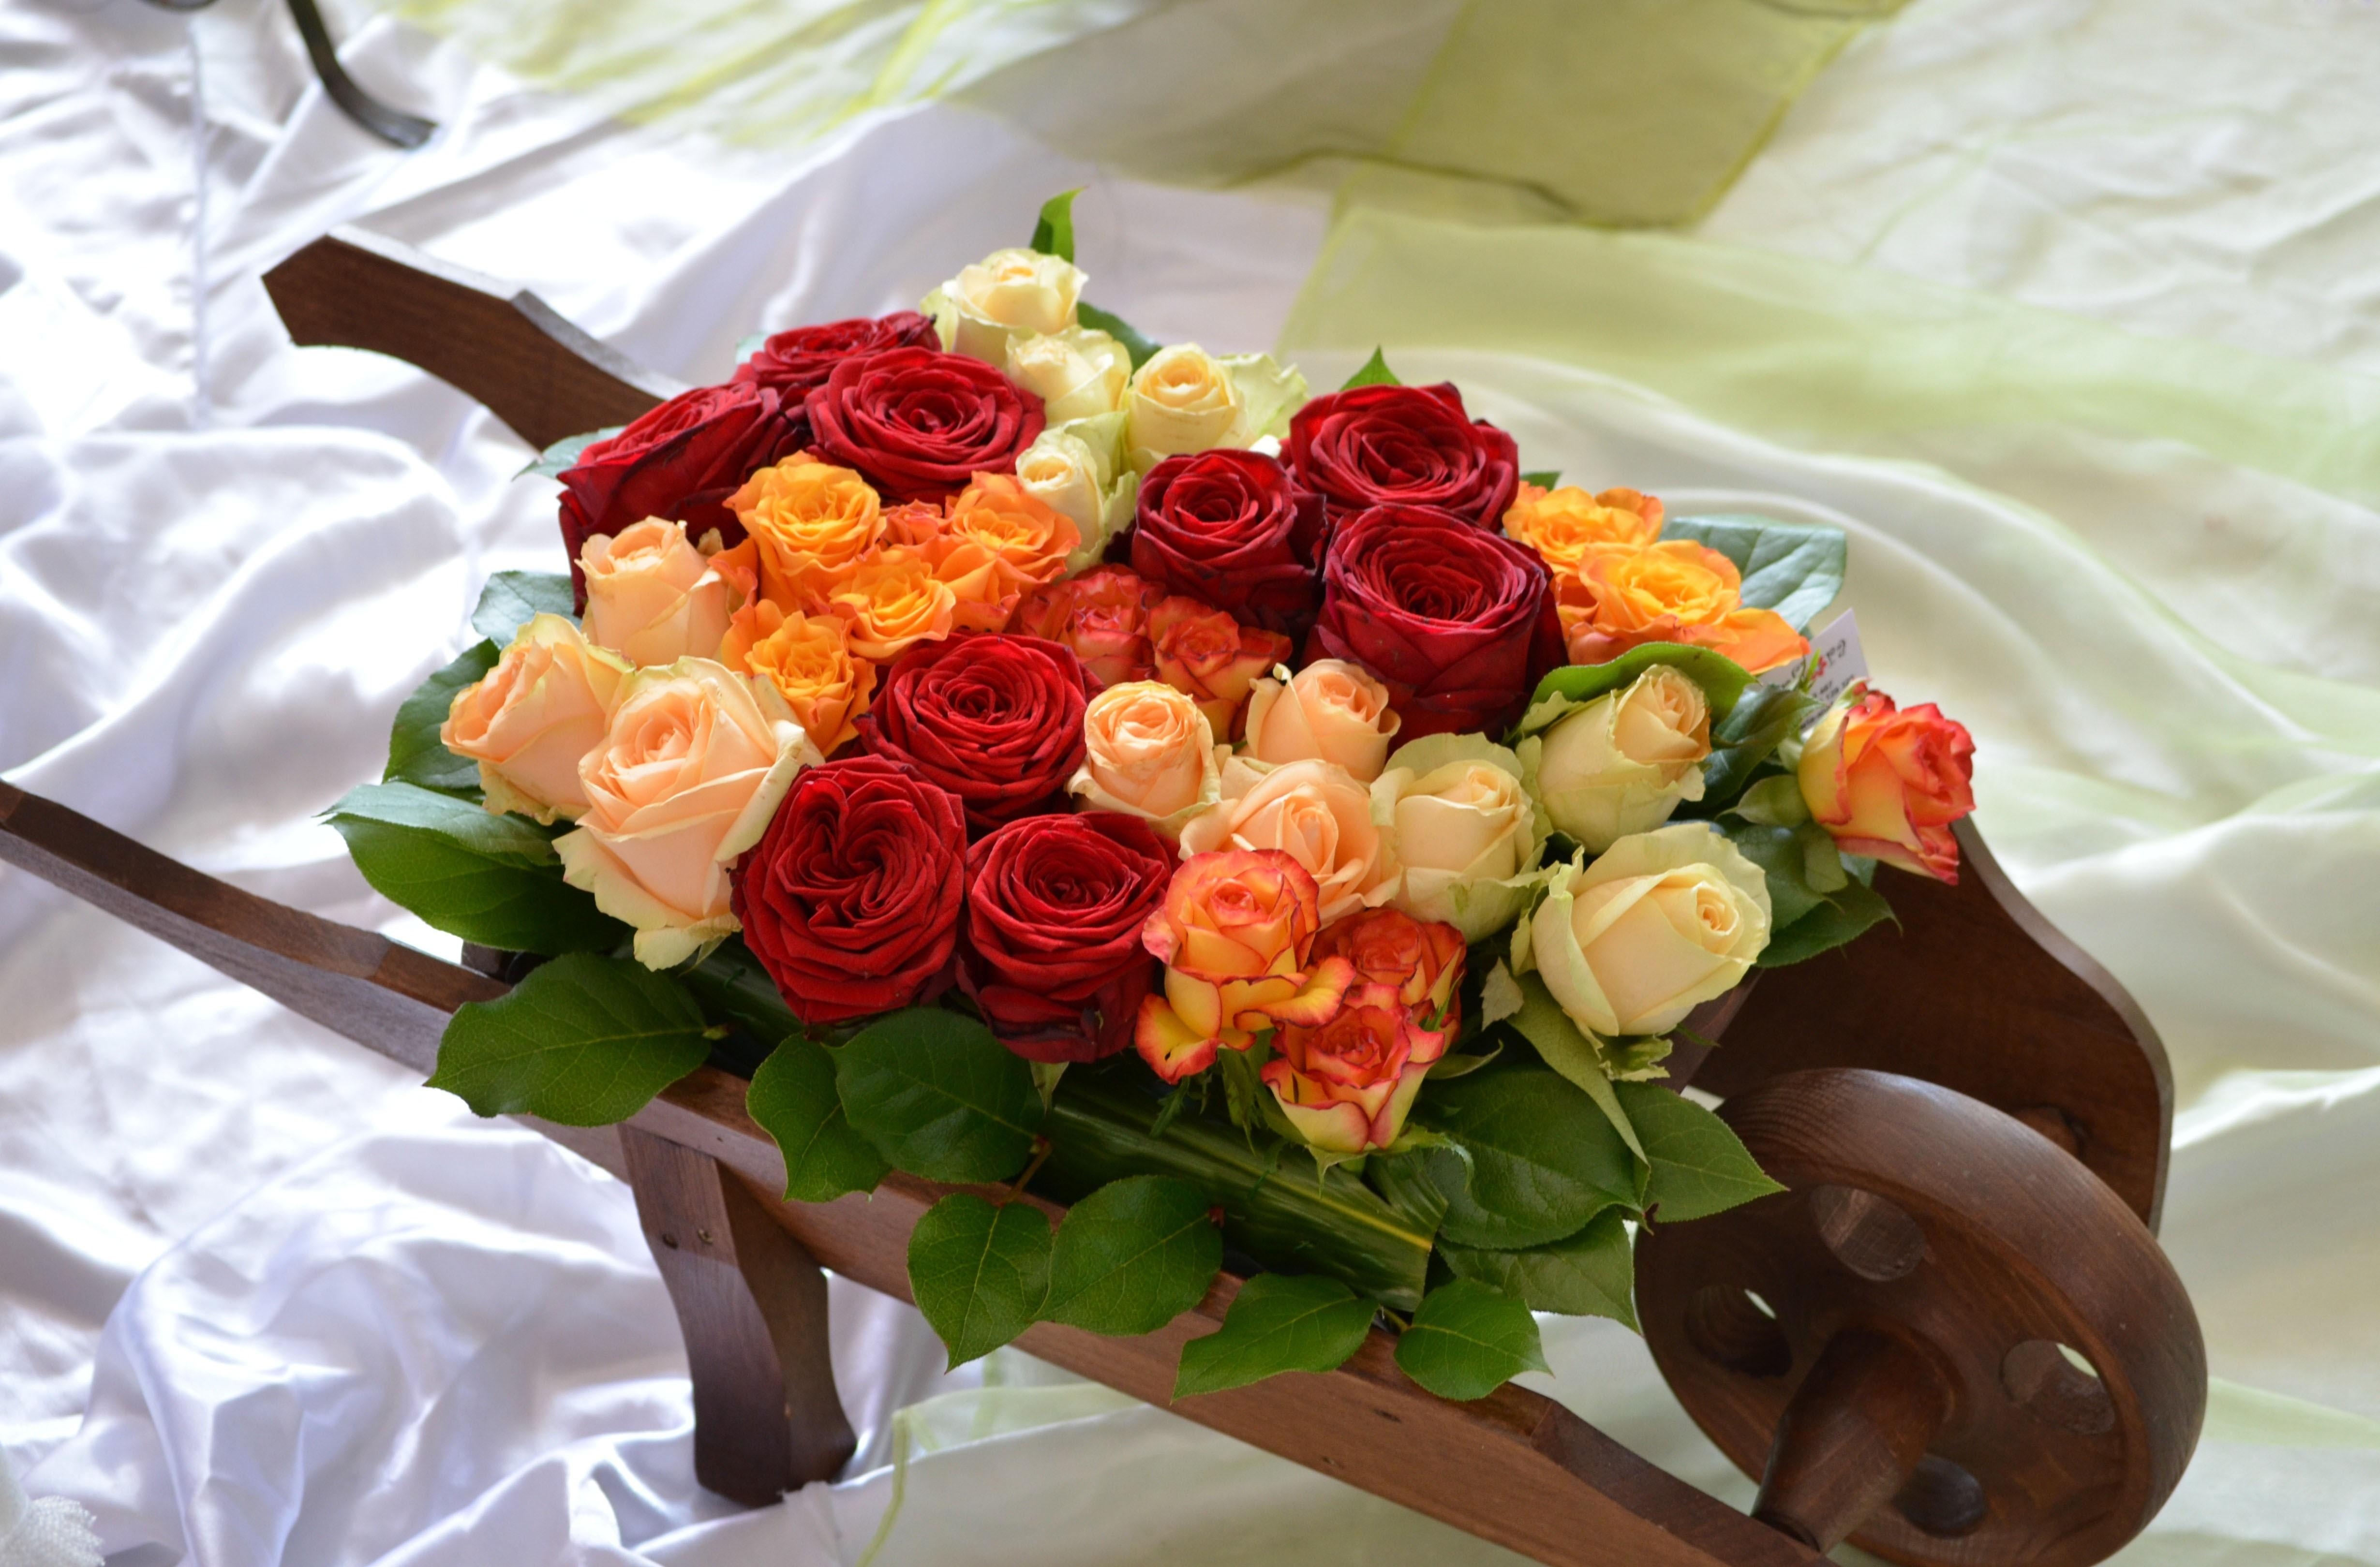 bed, flowers, roses, buds, note, different, cart